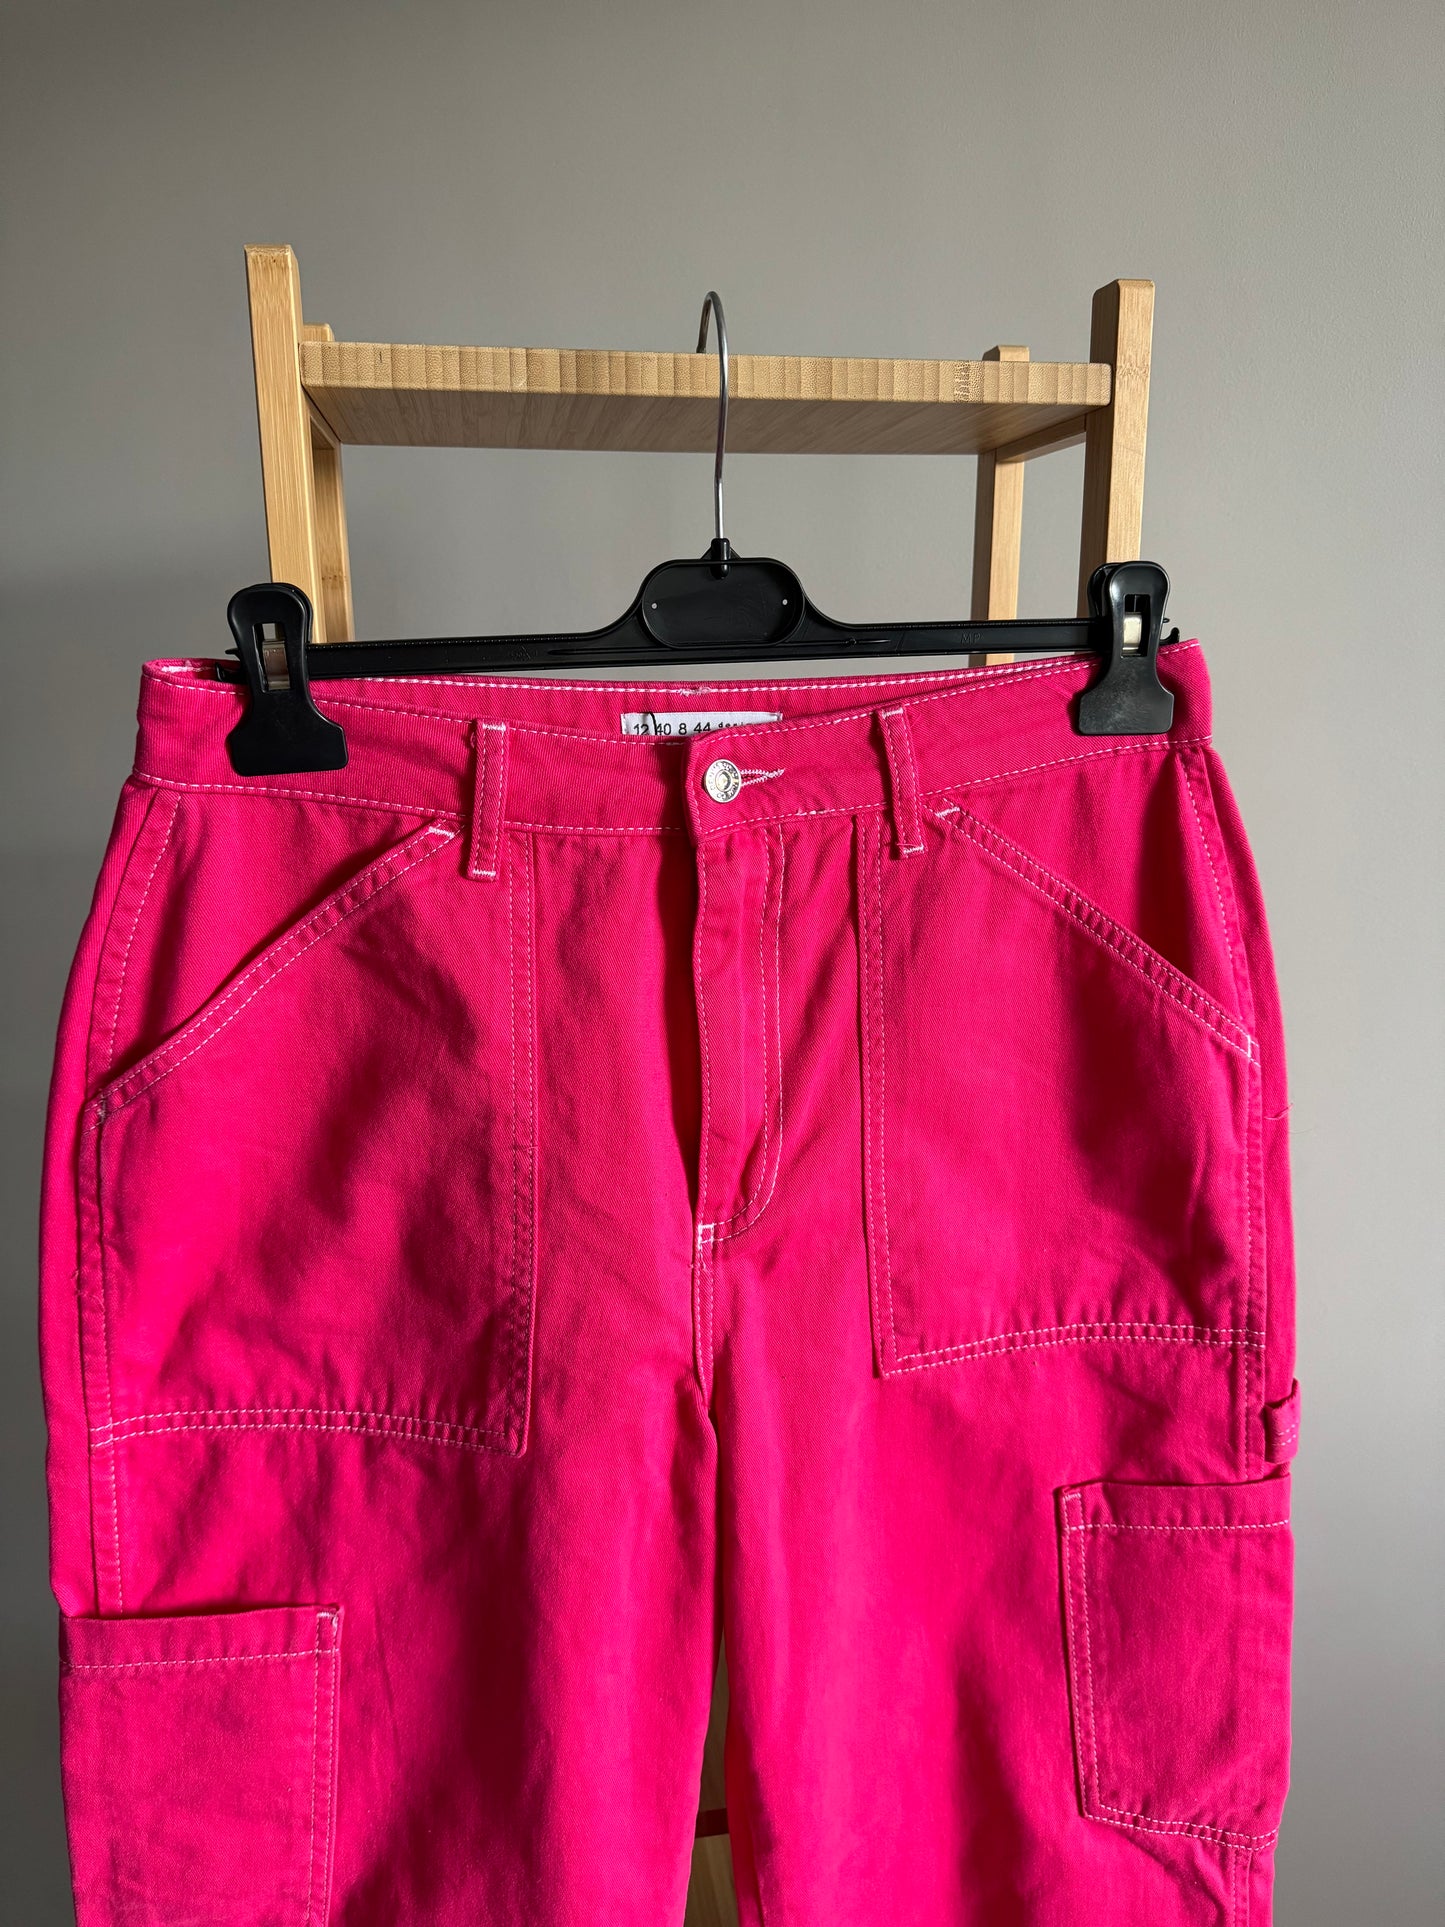 Jeans rose Denim & Co large Taille 40